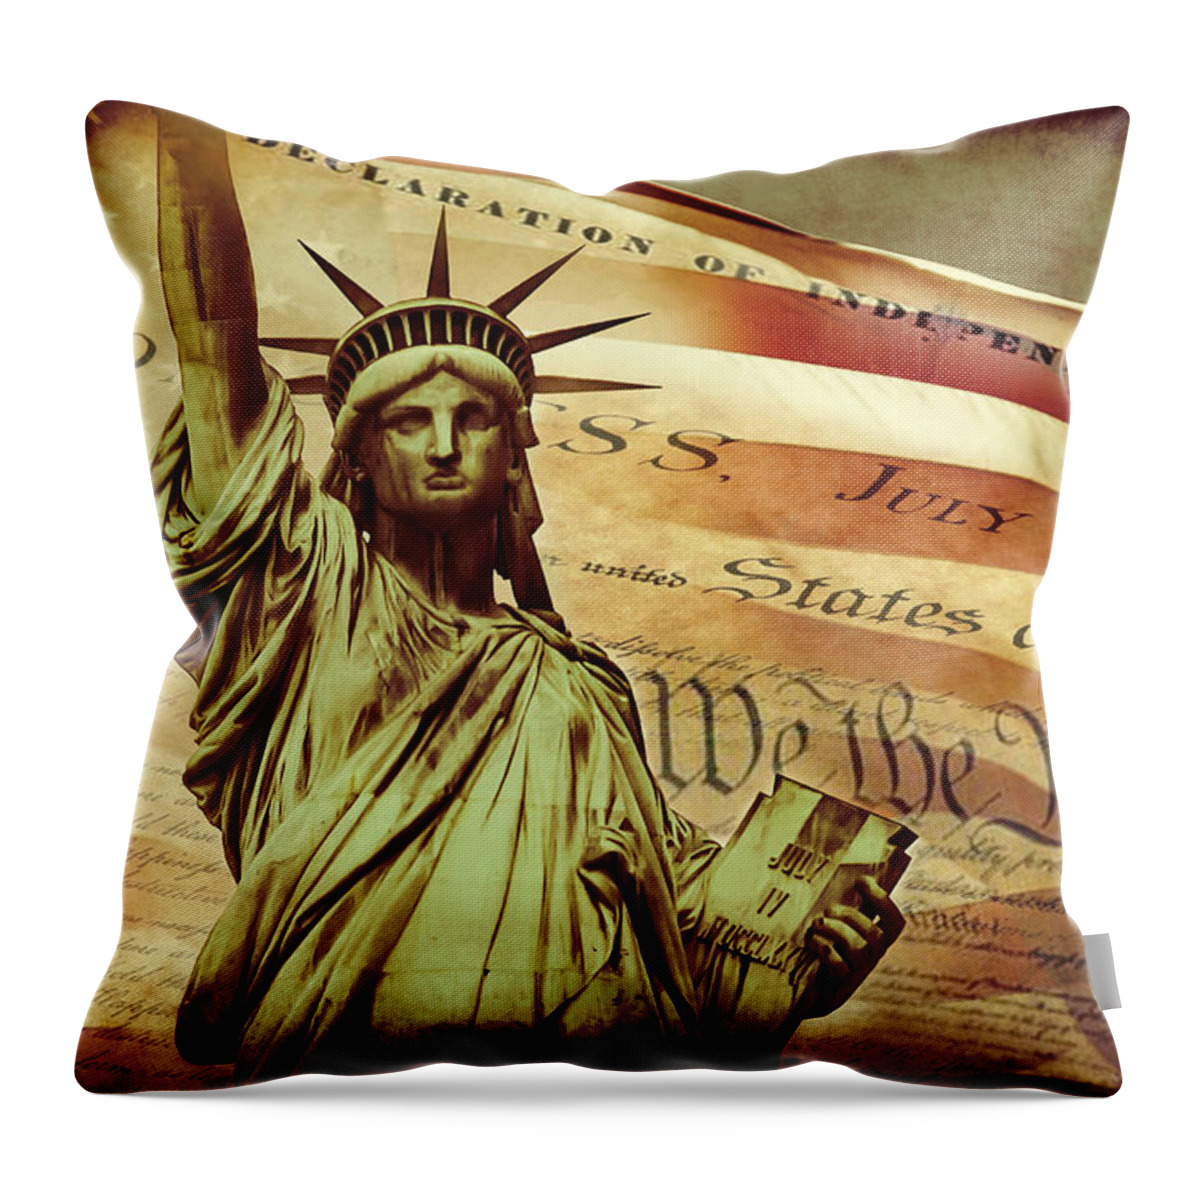 Statue Of Liberty Throw Pillow featuring the digital art Declaration Of Independence by Az Jackson